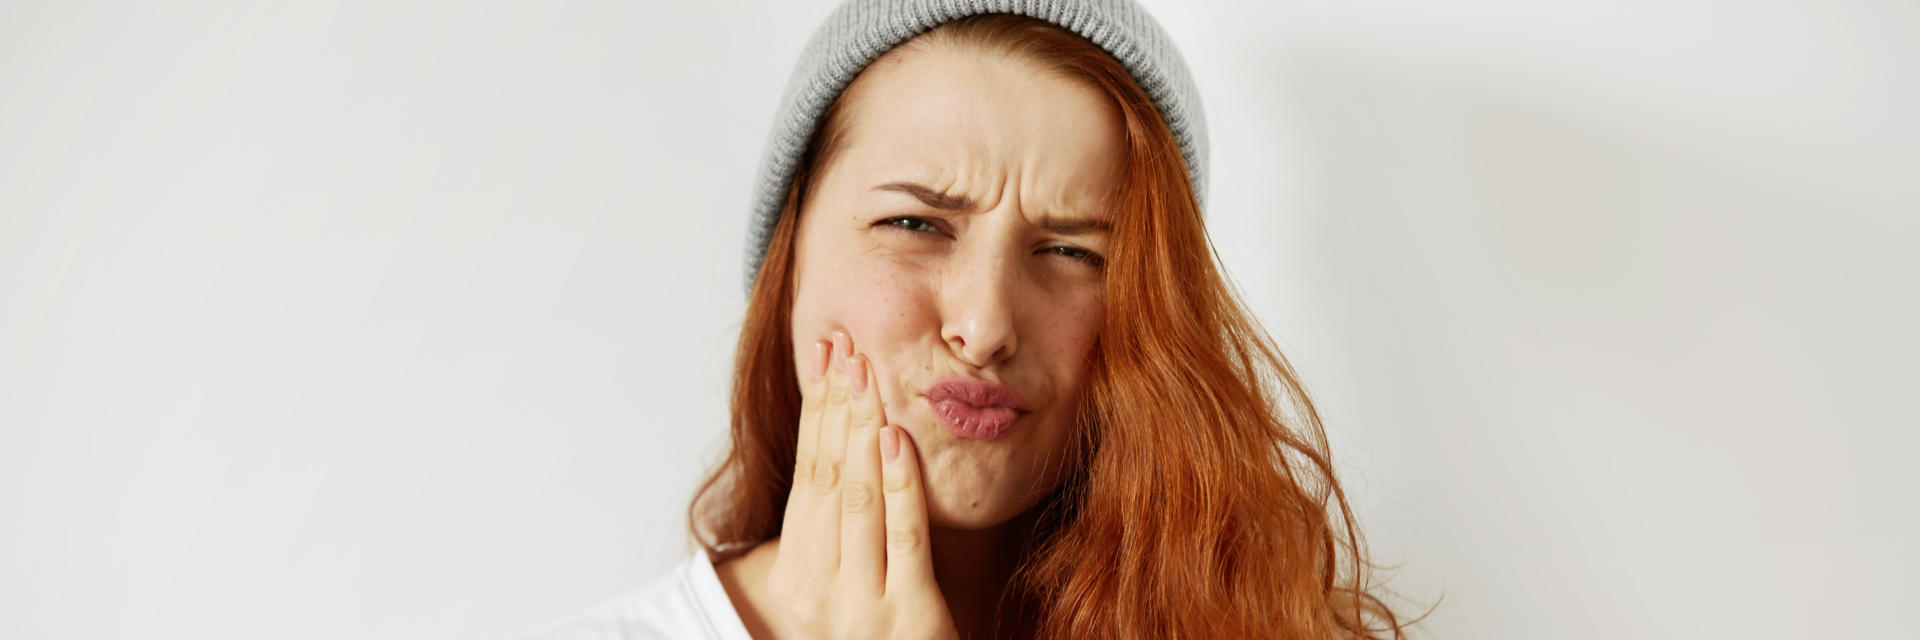 Young ginger-haired woman suffering from dental pain.